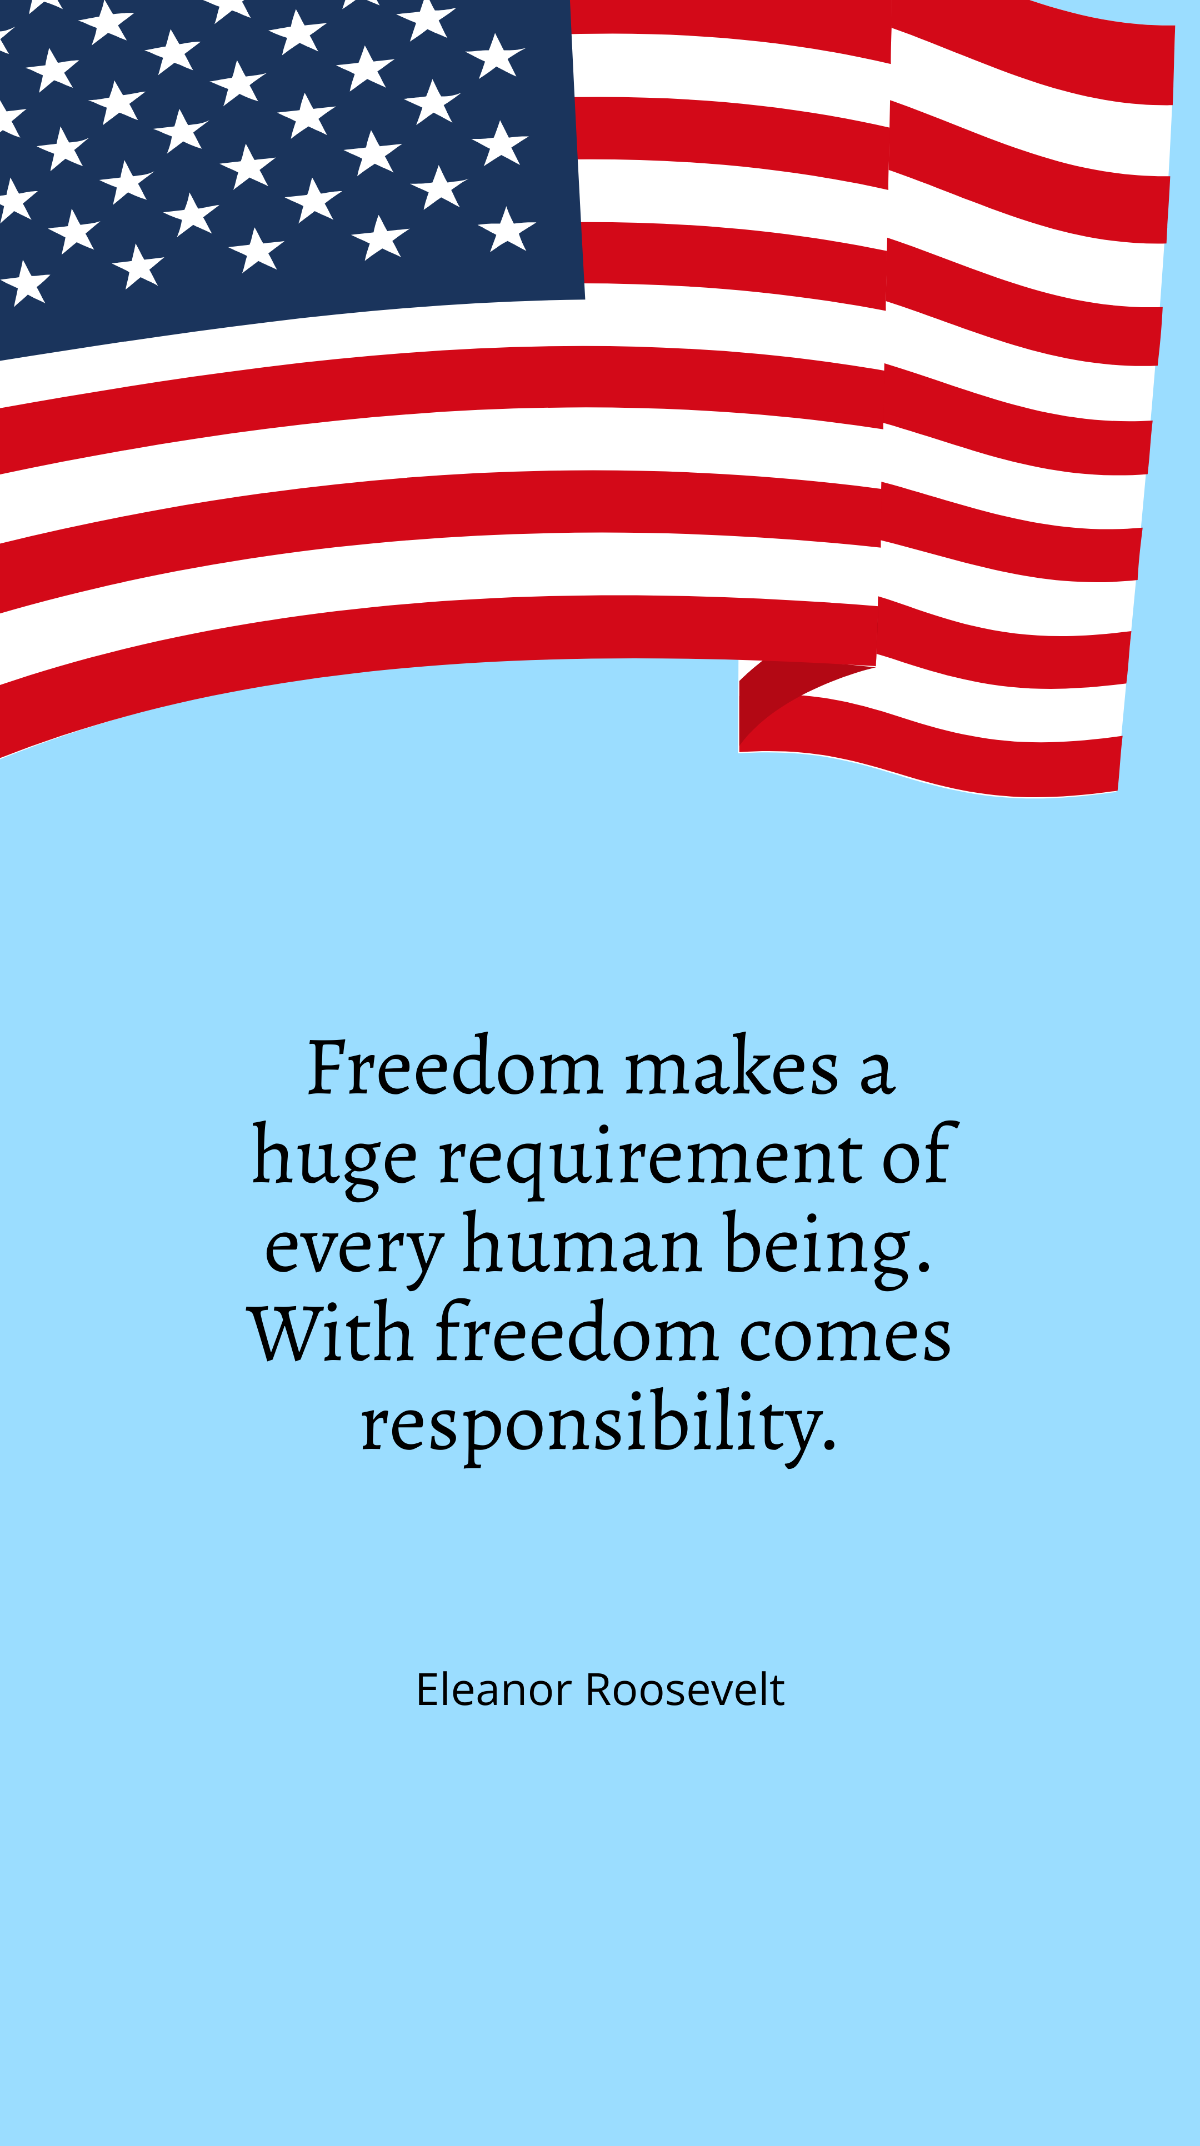 Eleanor Roosevelt - Freedom makes a huge requirement of every human being. With freedom comes responsibility. Template